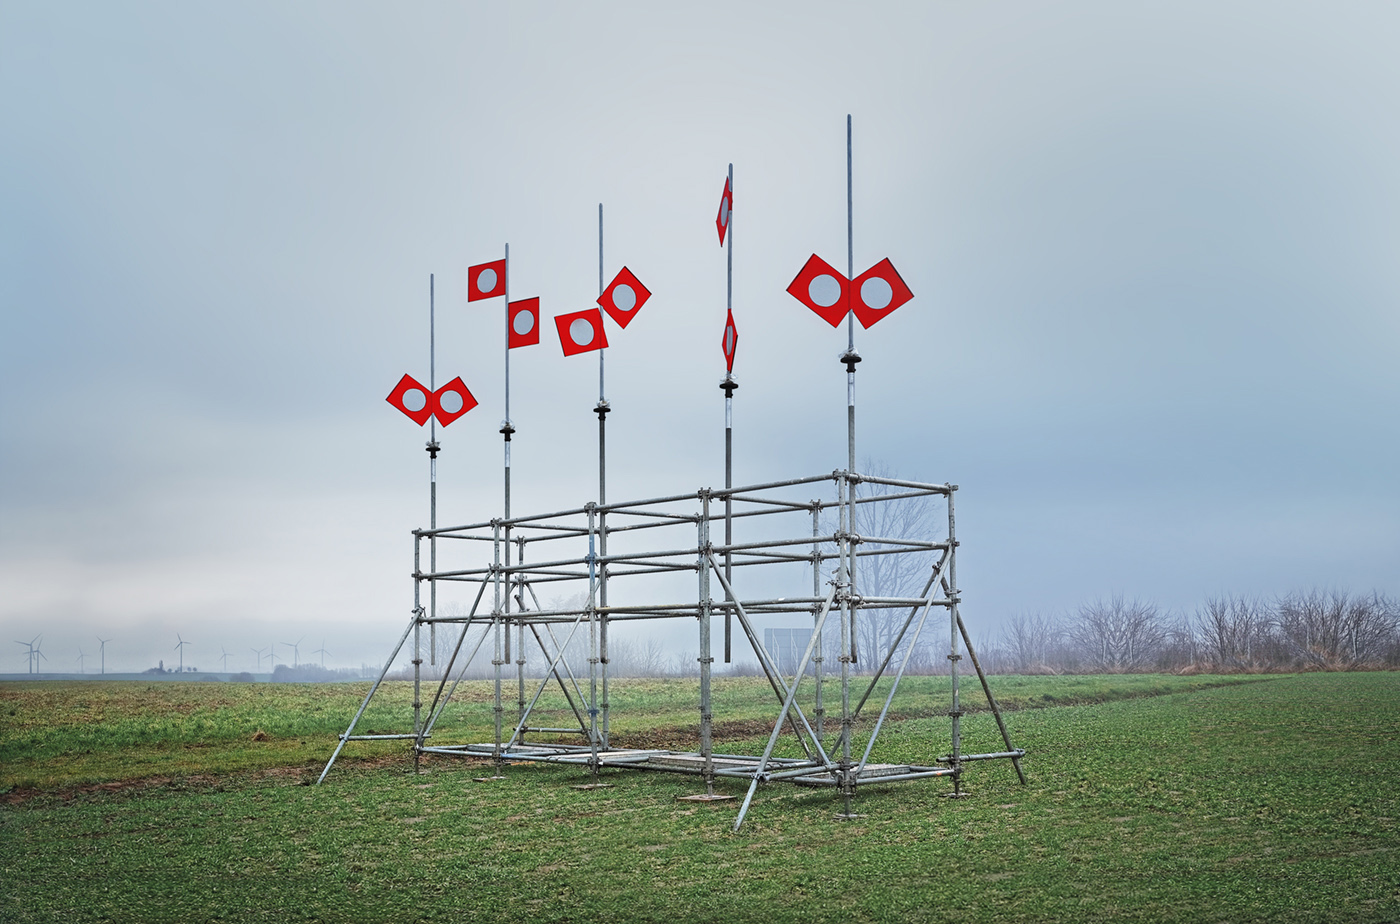 PAX, installation with flag semaphore and wind noises